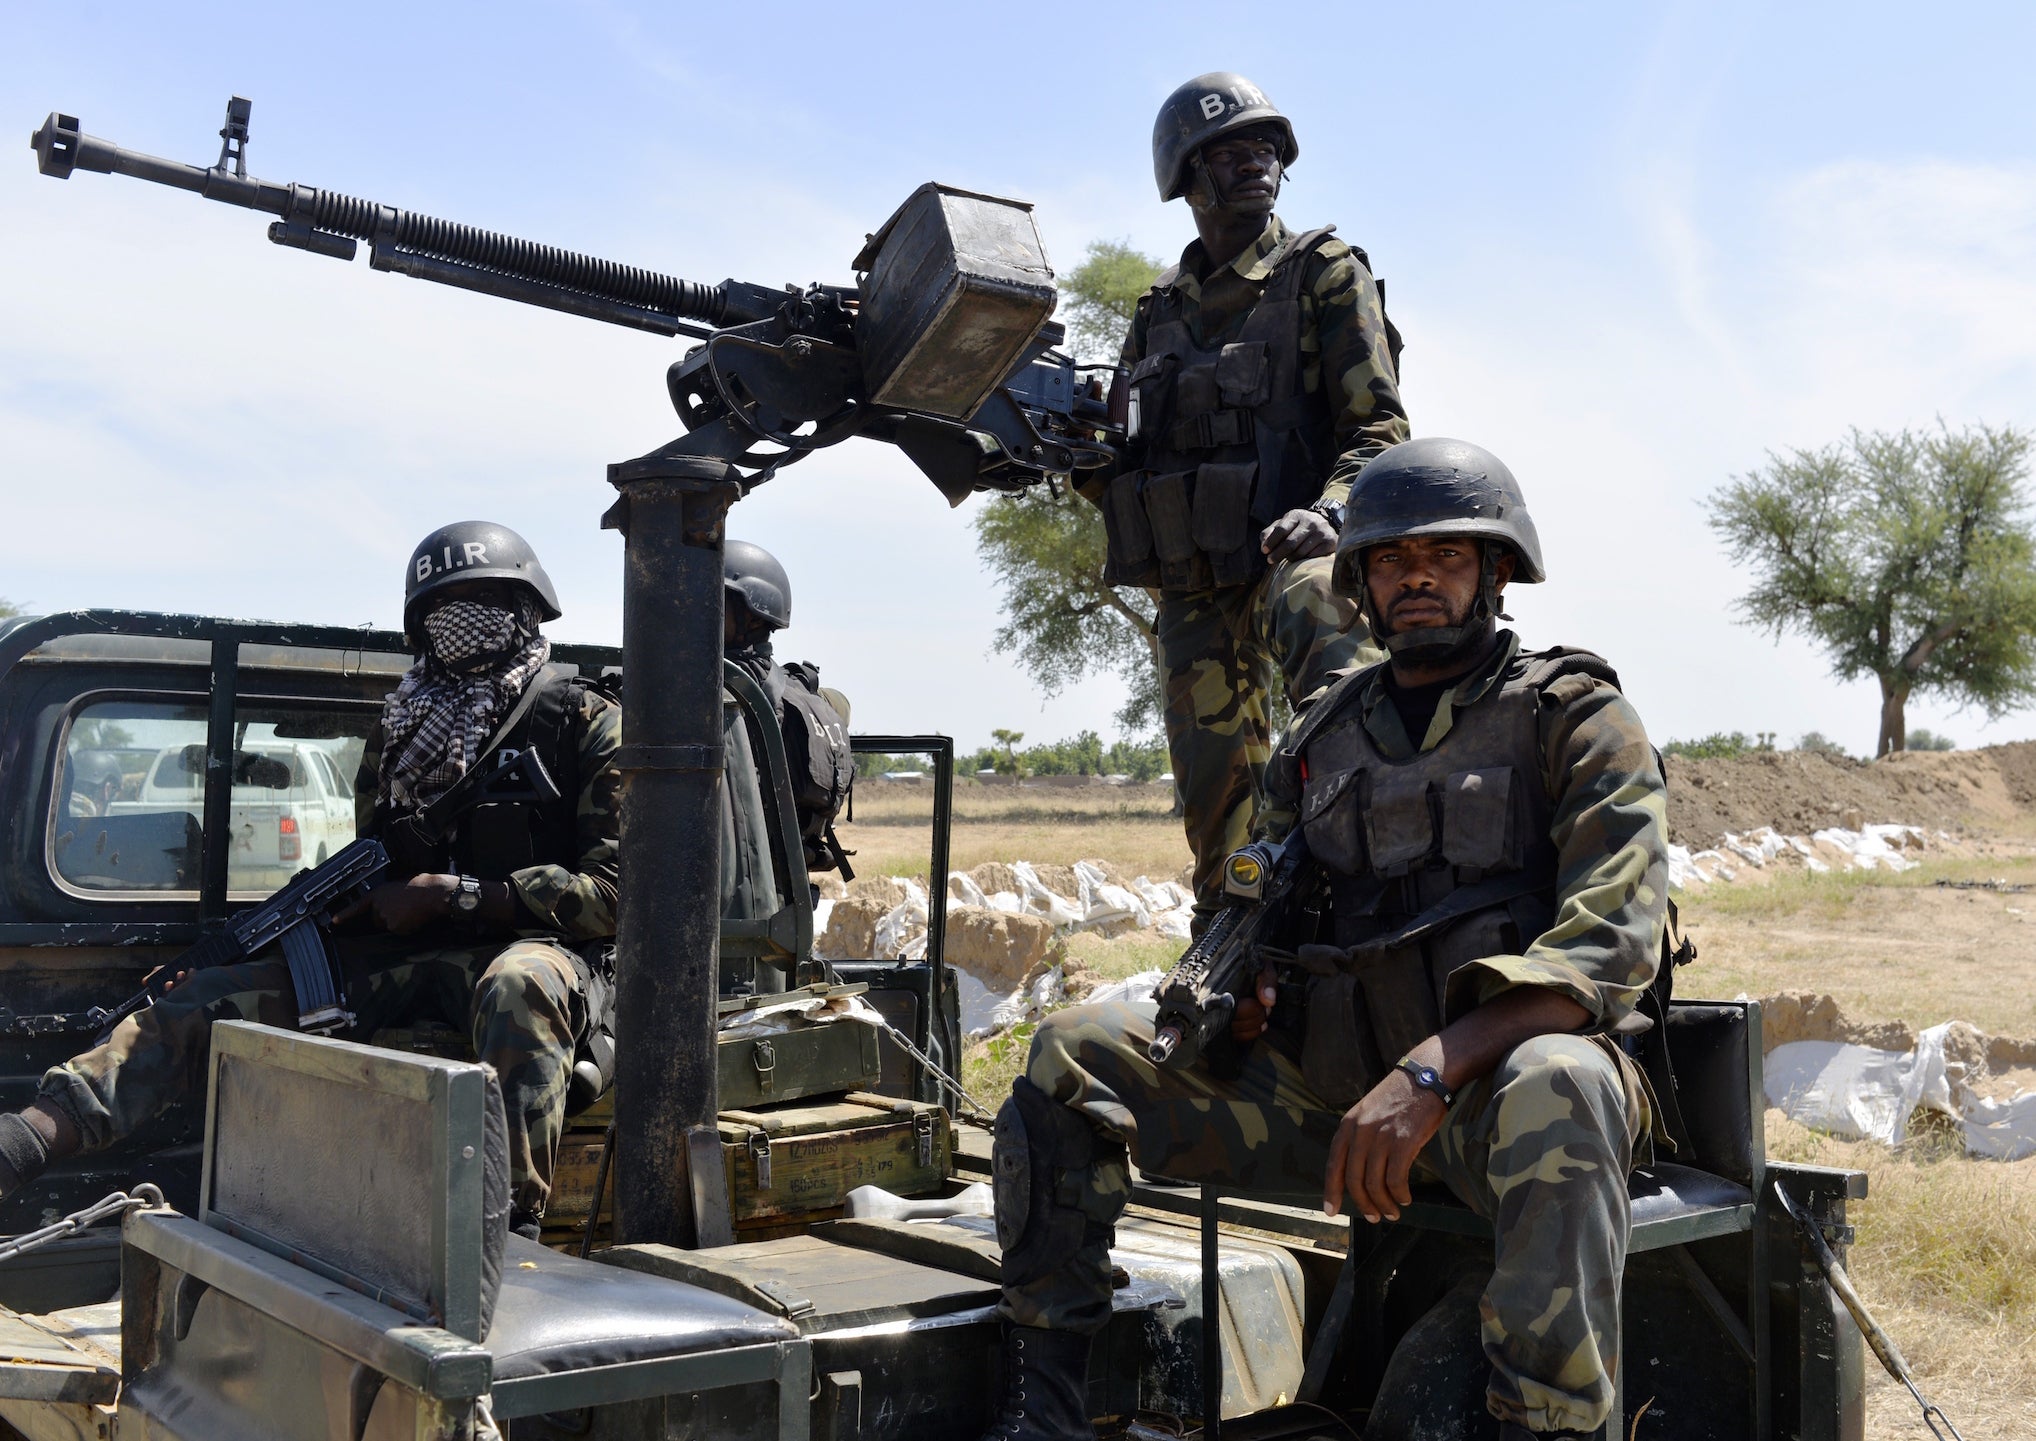 Cameroonian soldiers patrol on 12 November 2014 in Amchide, northern Cameroon.